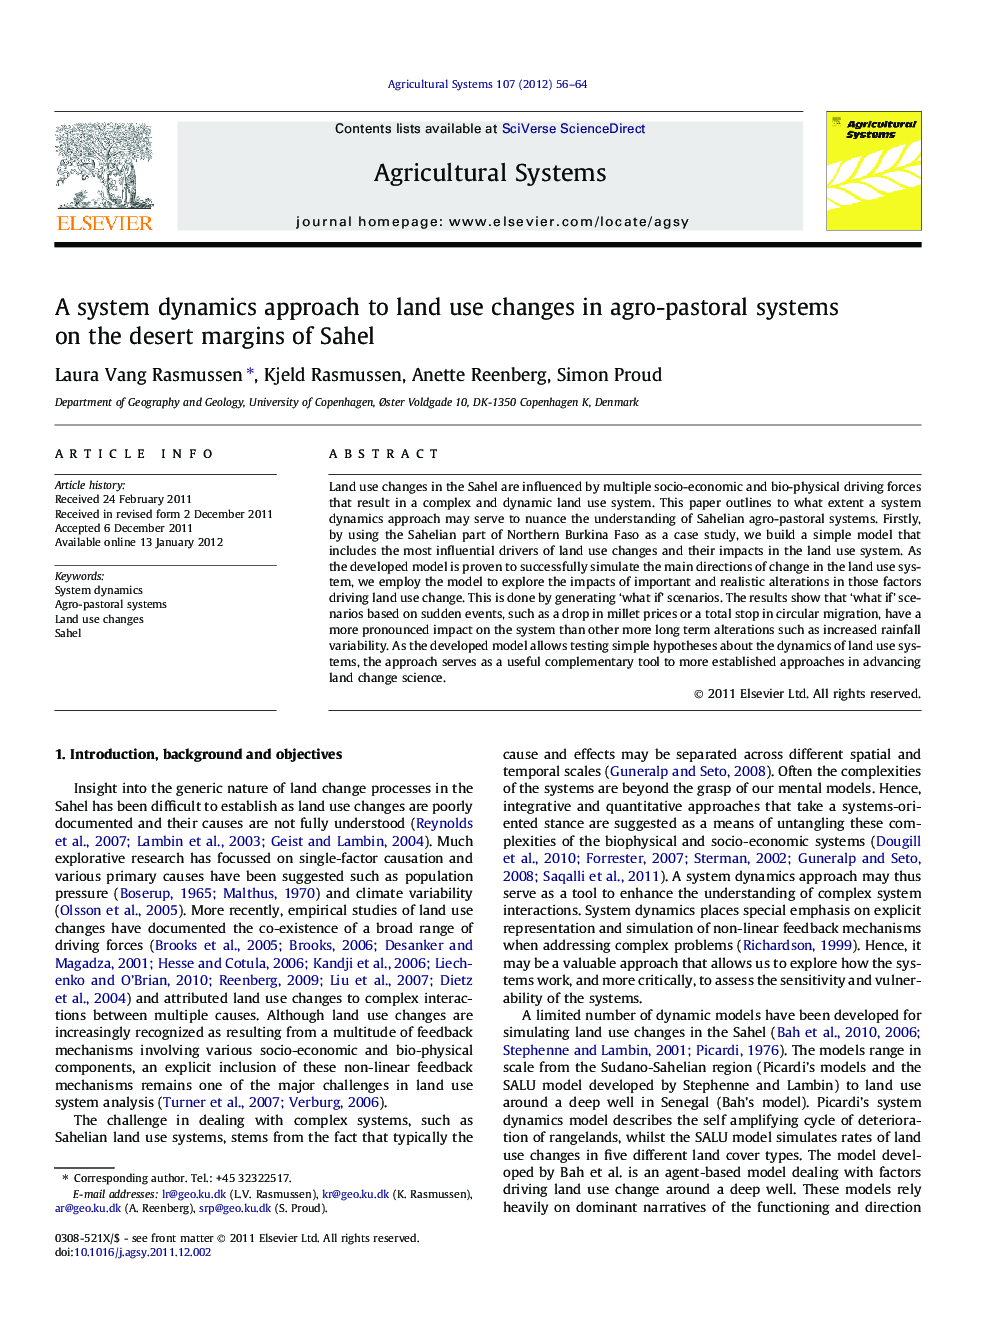 A system dynamics approach to land use changes in agro-pastoral systems on the desert margins of Sahel